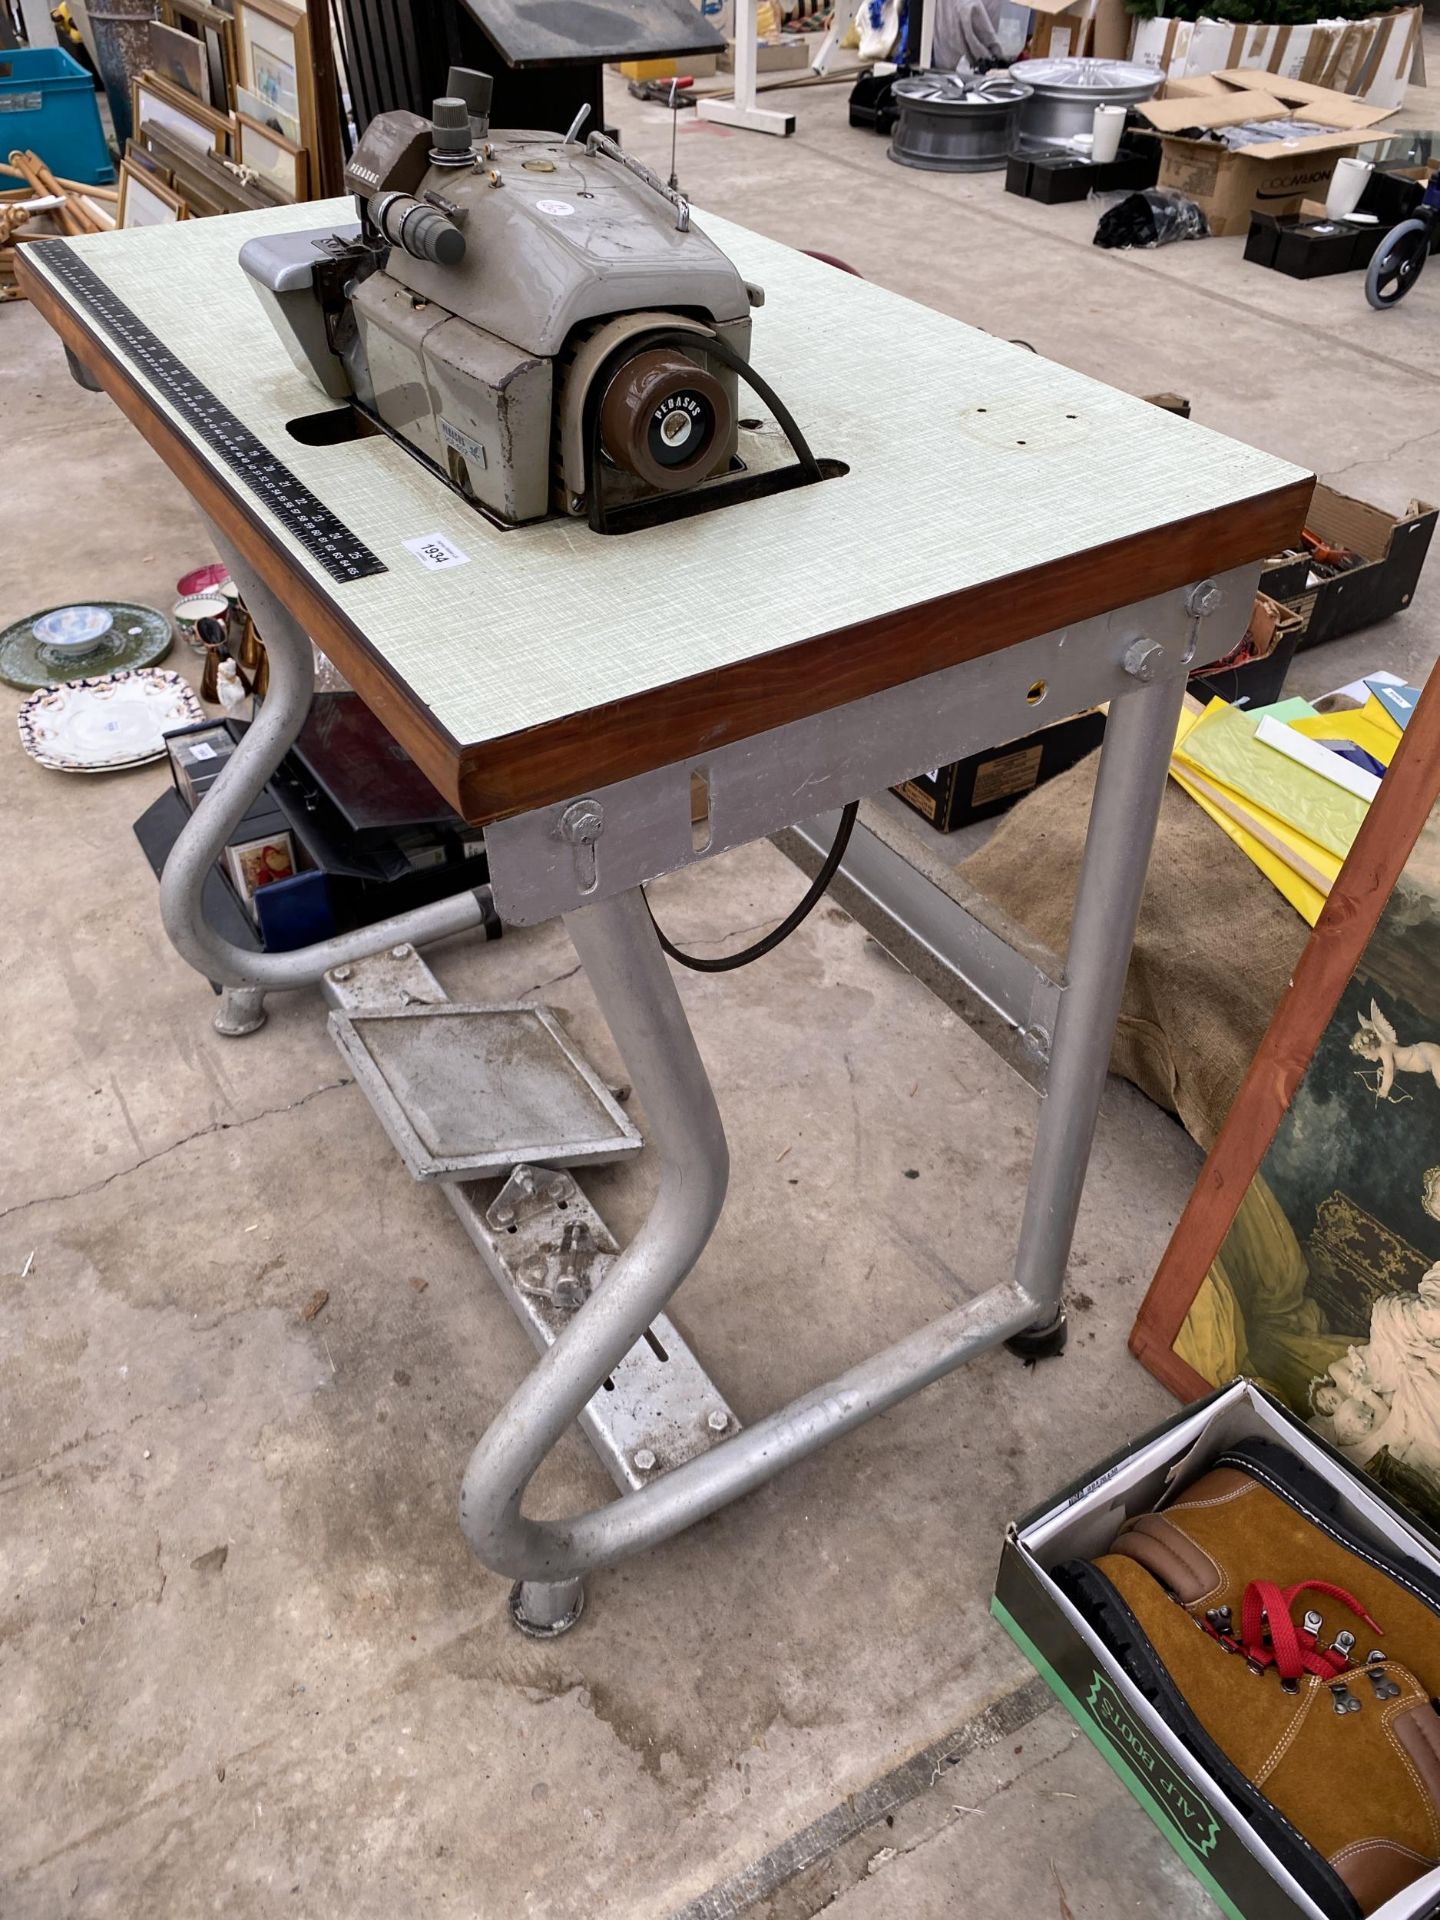 A PEGASUS DCR-602 INDUSTRIAL SEWING MACHINE WITH TREADLE BASE - Image 3 of 3